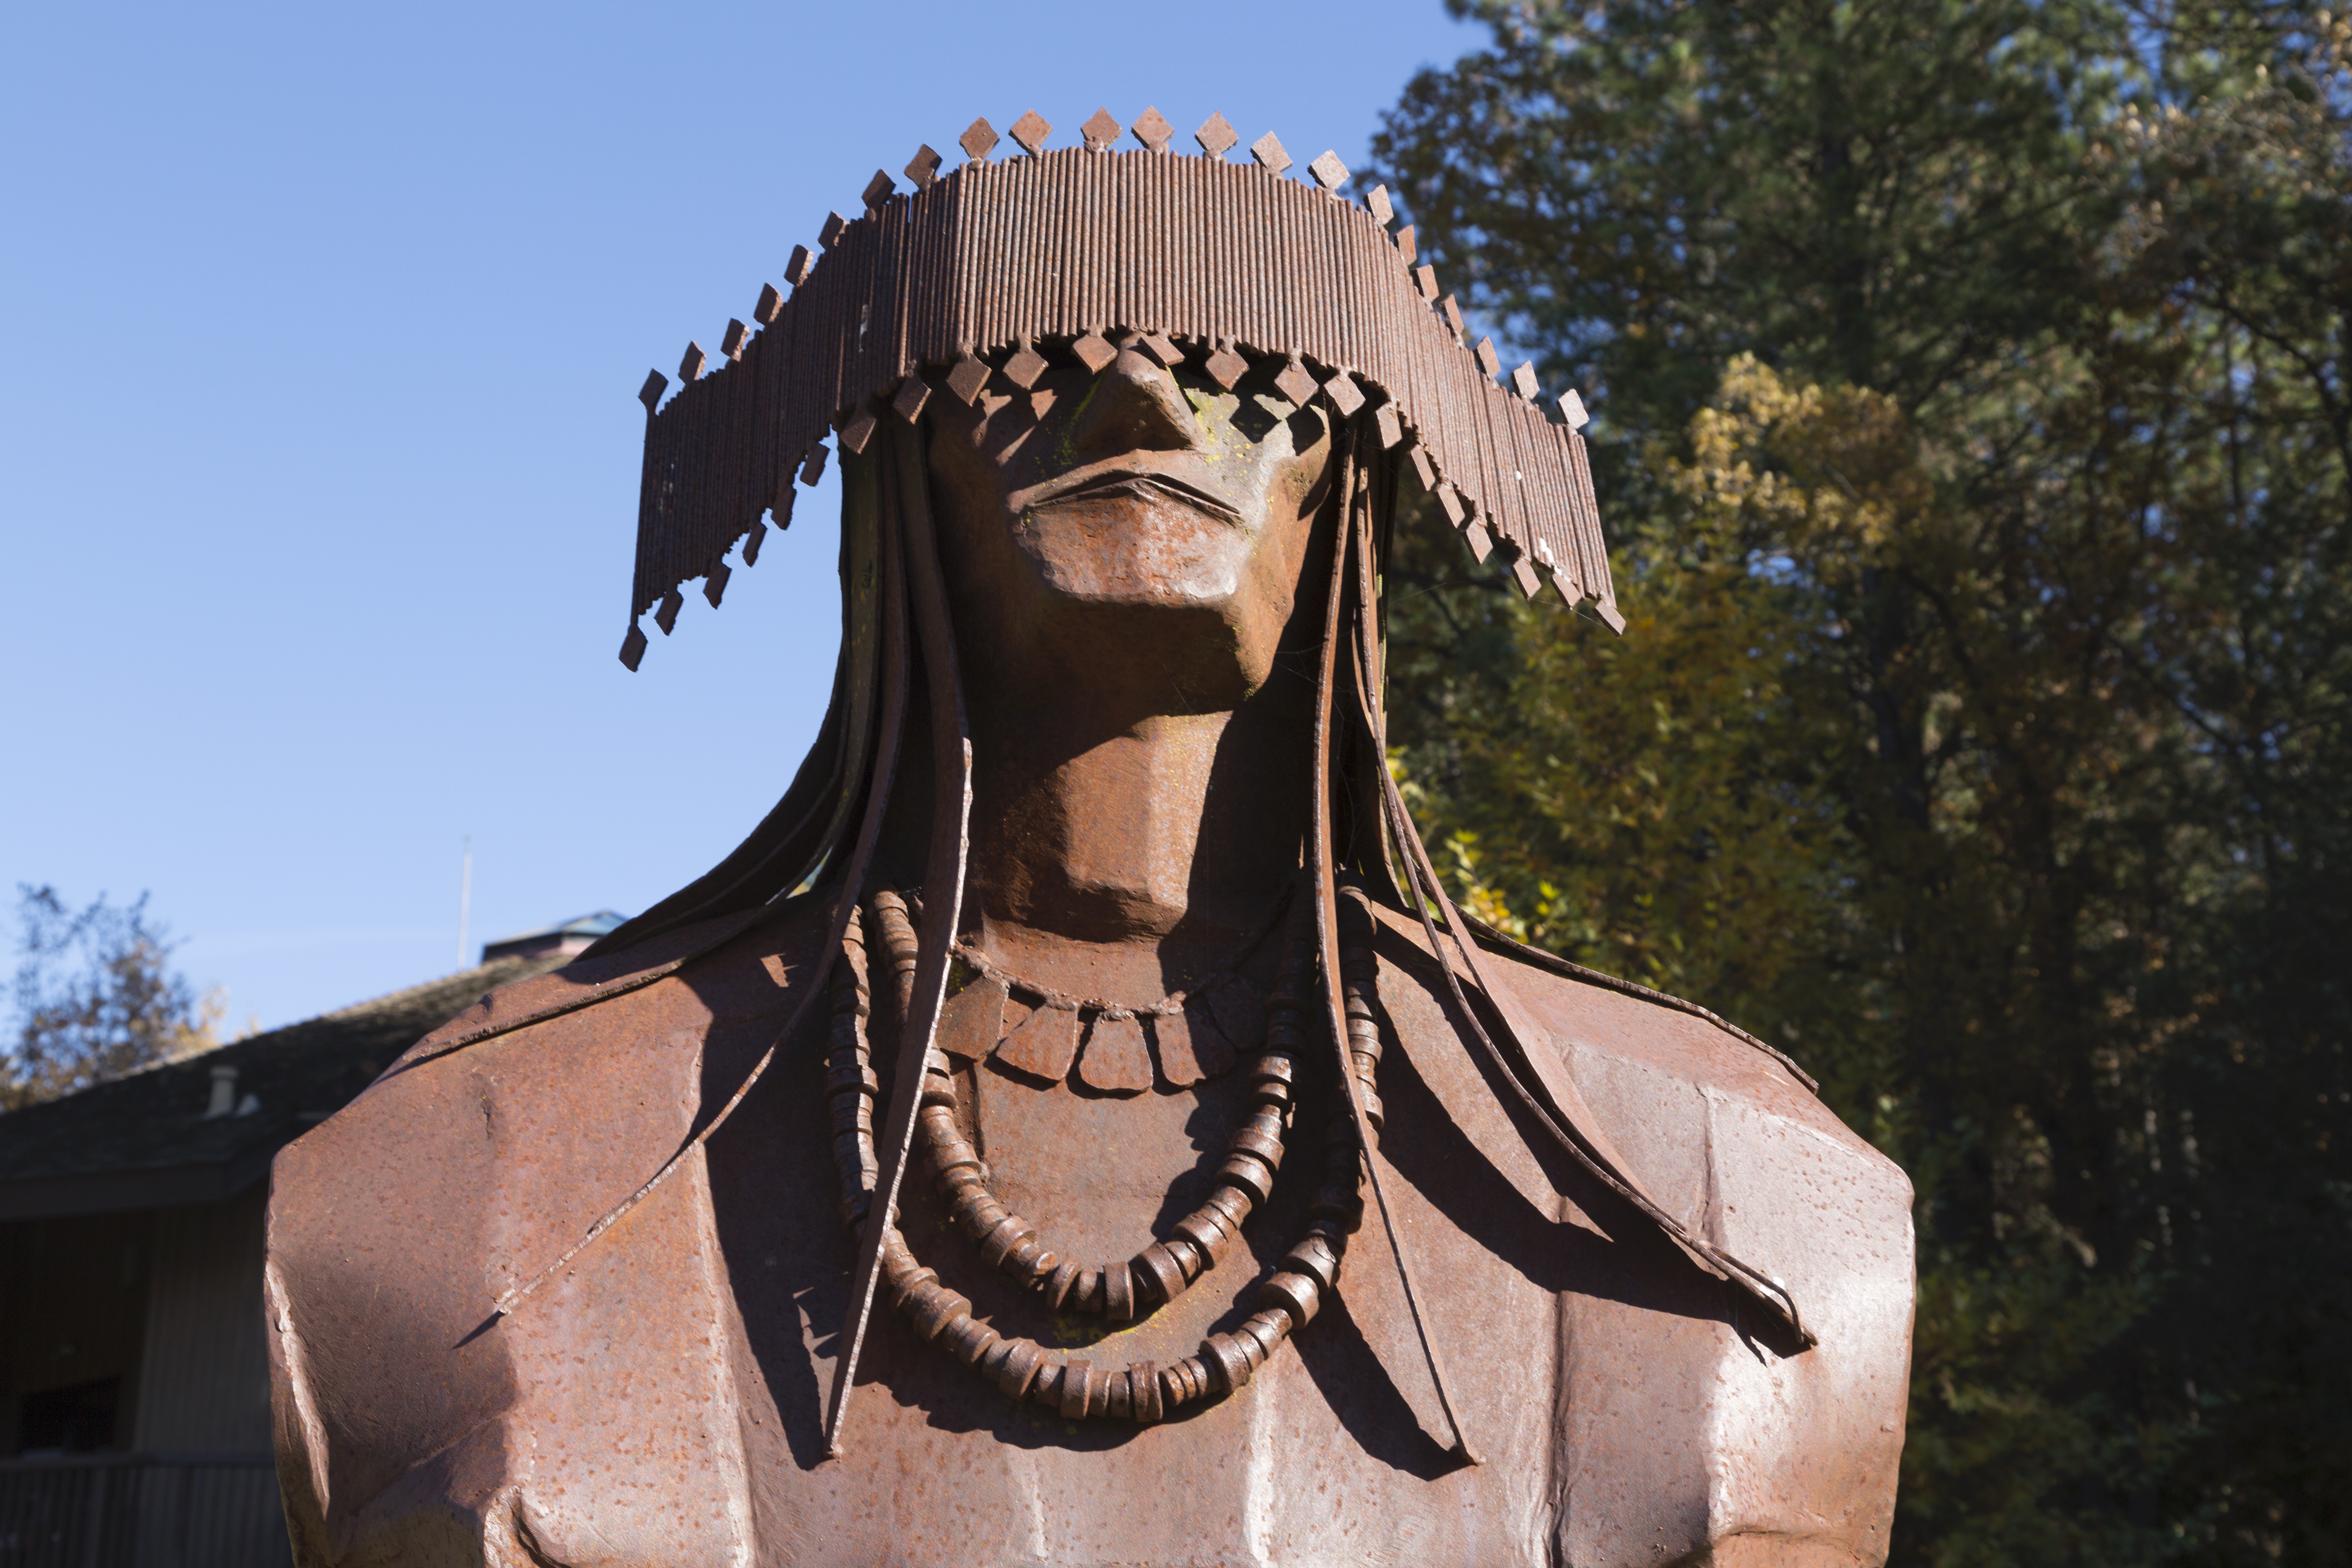 Sculpture of a Miwok Dancer done in metal work at Indian Grinding Rock State Historic Park California